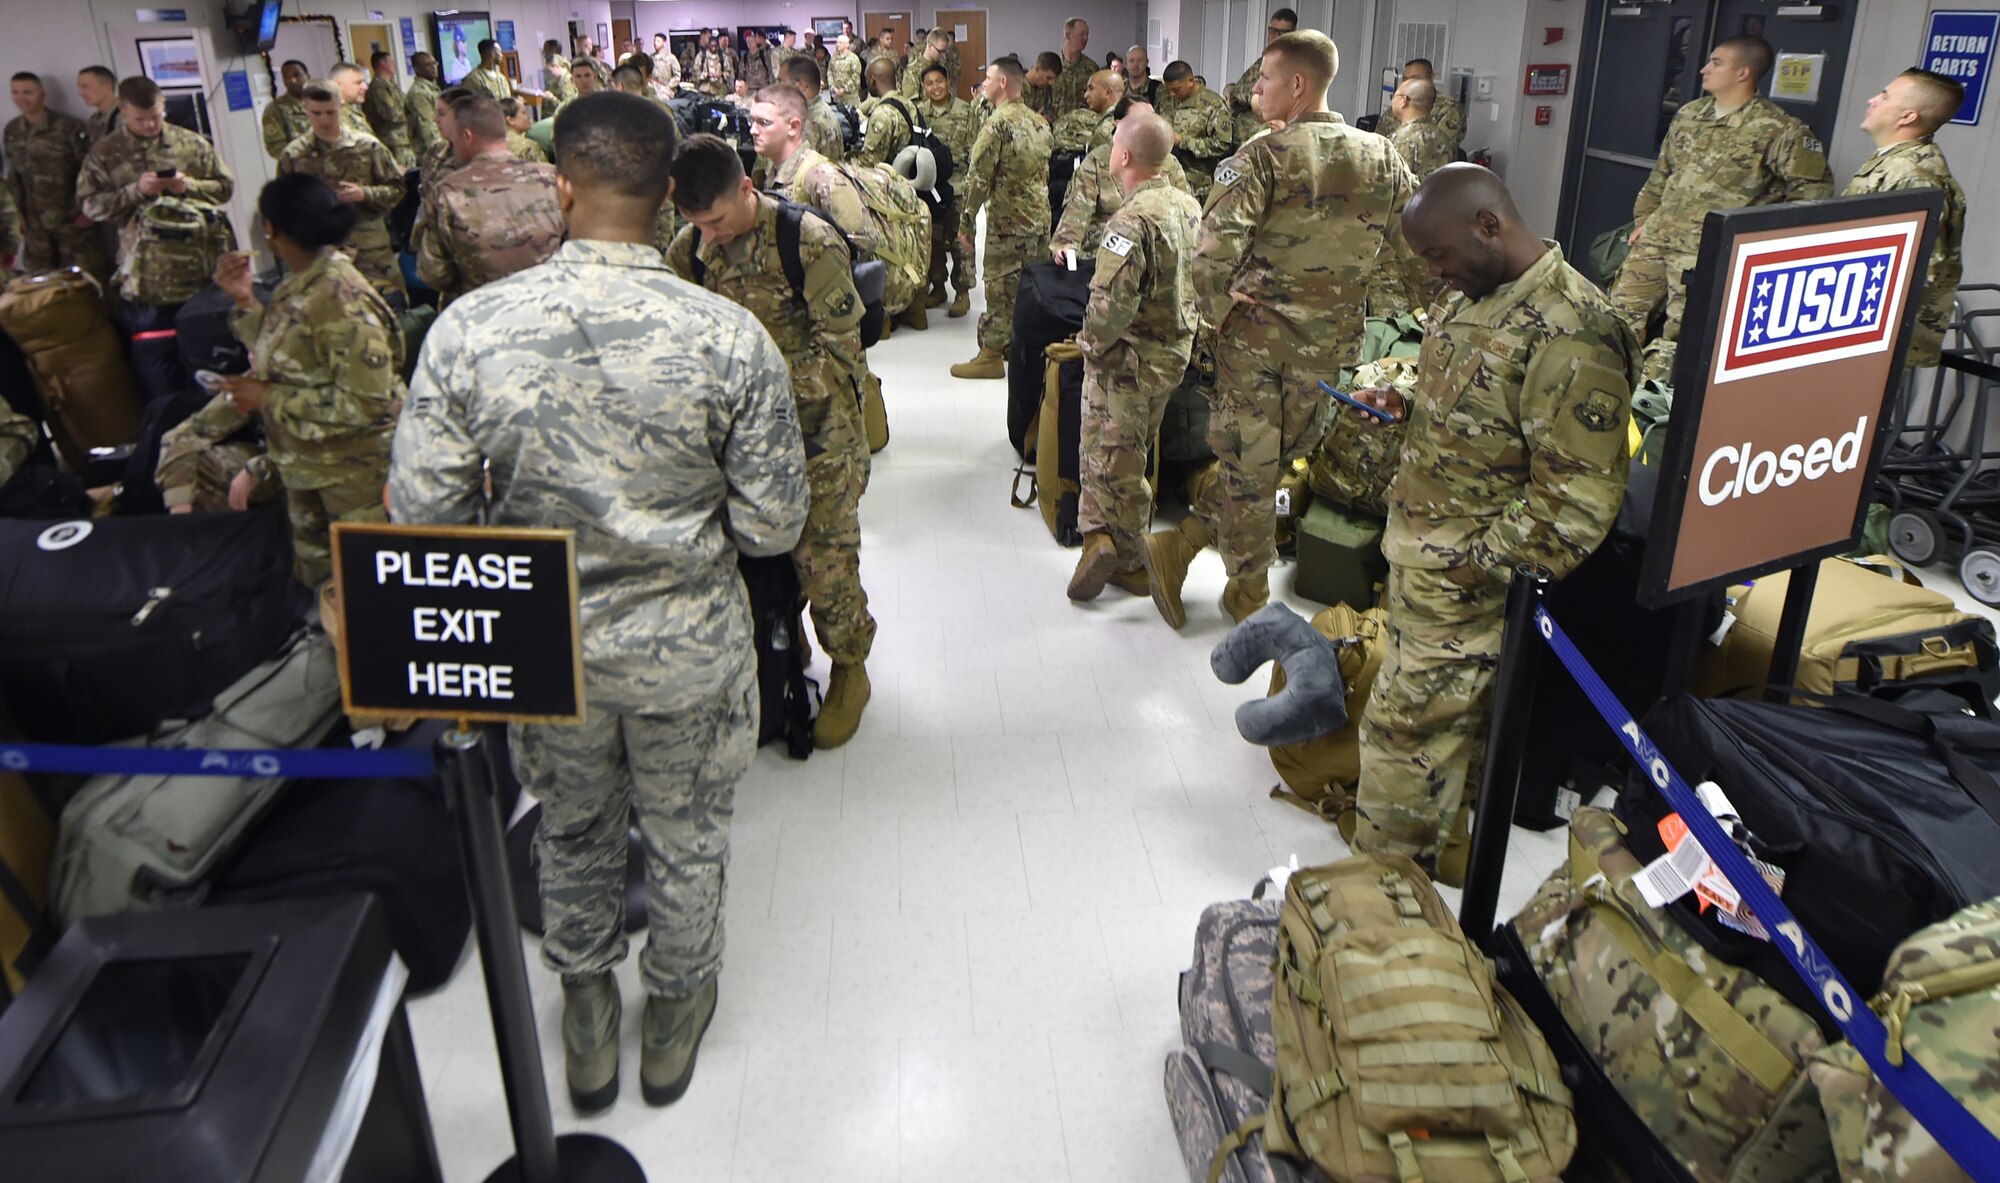 Passengers crowd the Joint Base Charleston Temporary Passenger Terminal as they wait to be processed as part of a mission to deploy service members through Joint Base Charleston Oct. 15, 2018, in support of the Naval Station Norfolk air terminal while their airfield undergoes scheduled maintenance.